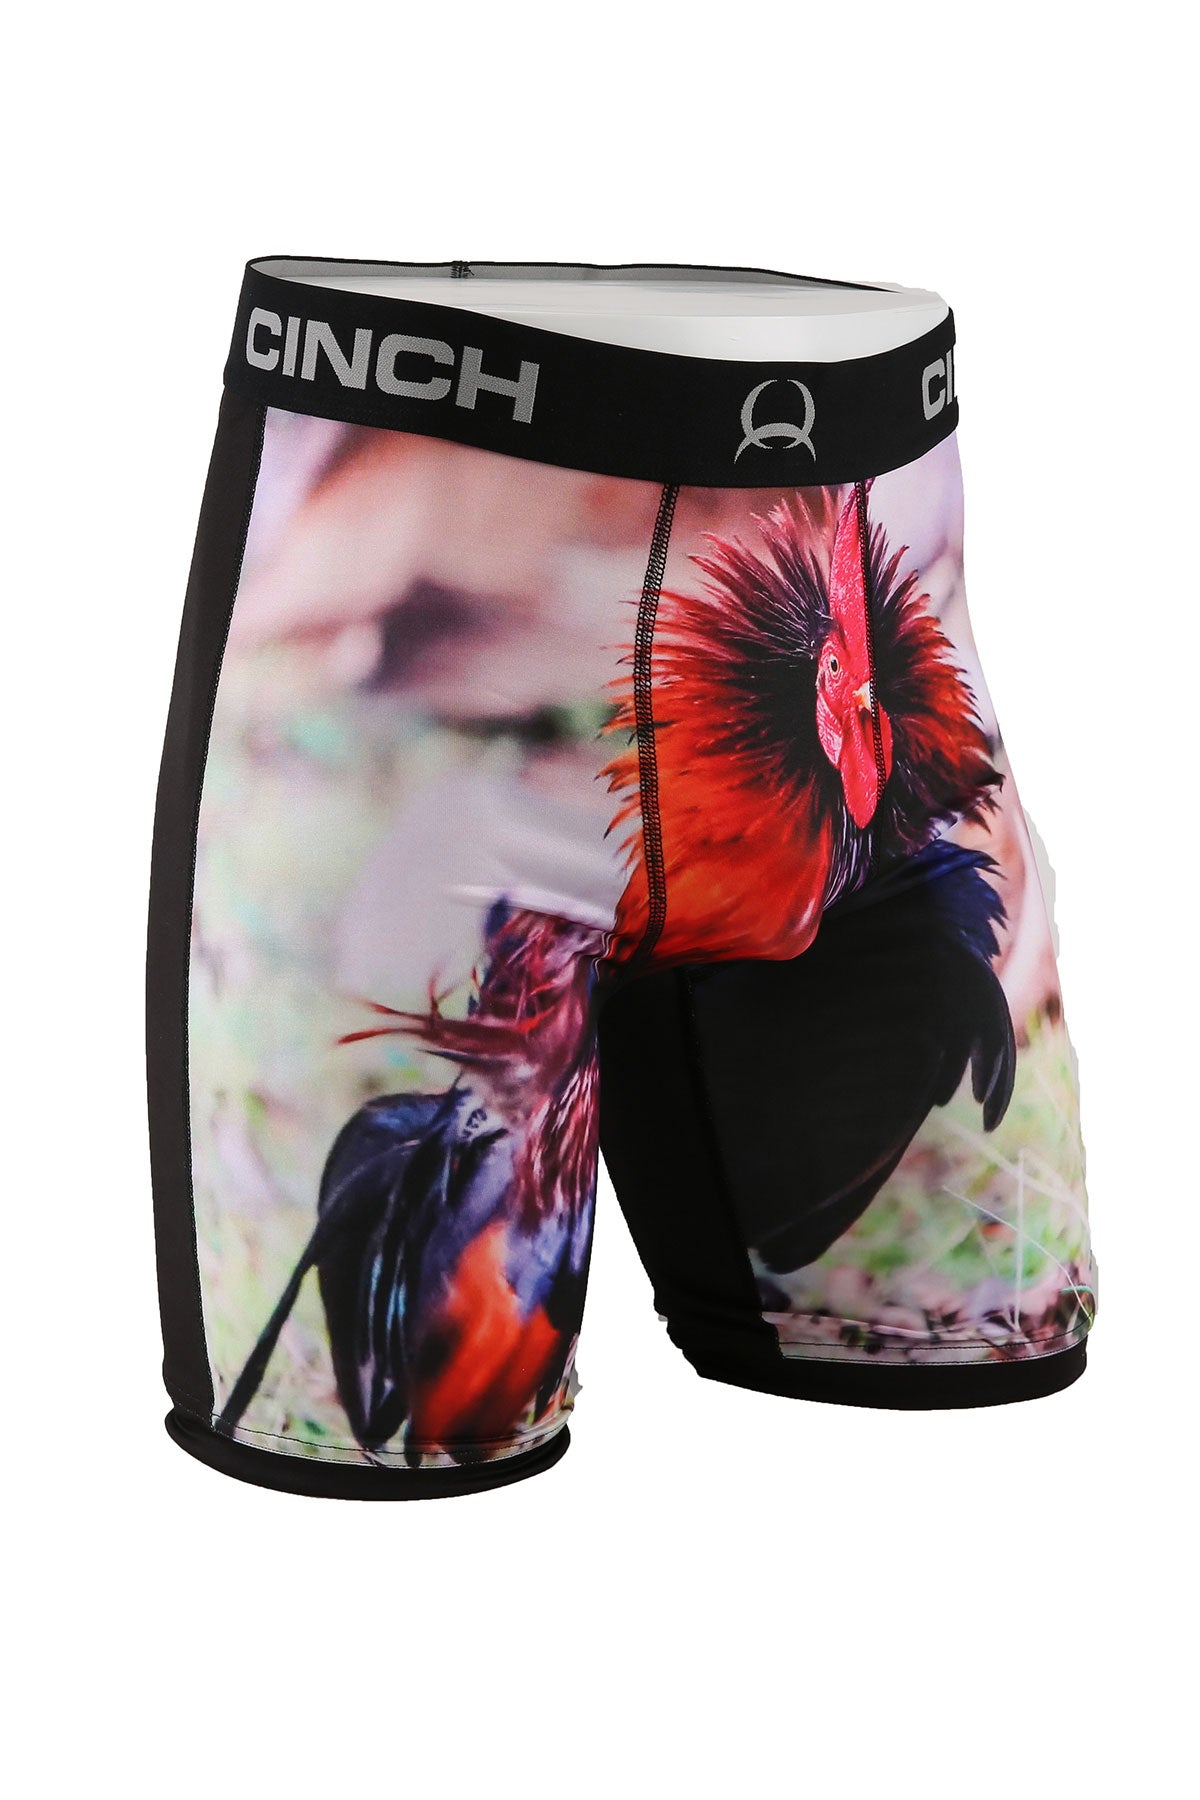 Cinch "Rooster" 9" Boxer Brief